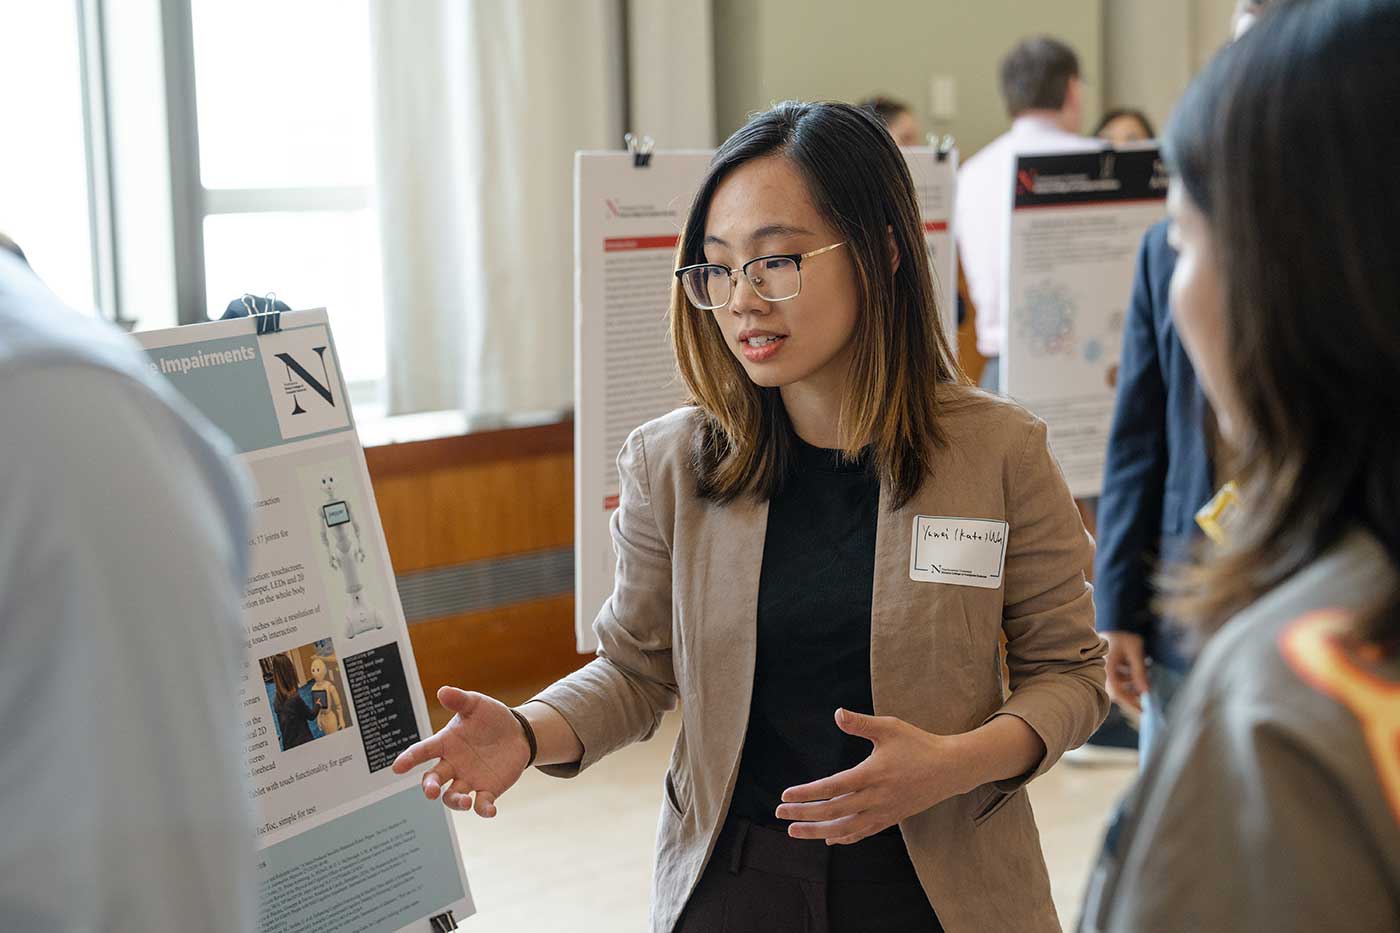 Yuwei (Kate) Wu points at her research poster while talking to two members of the audience